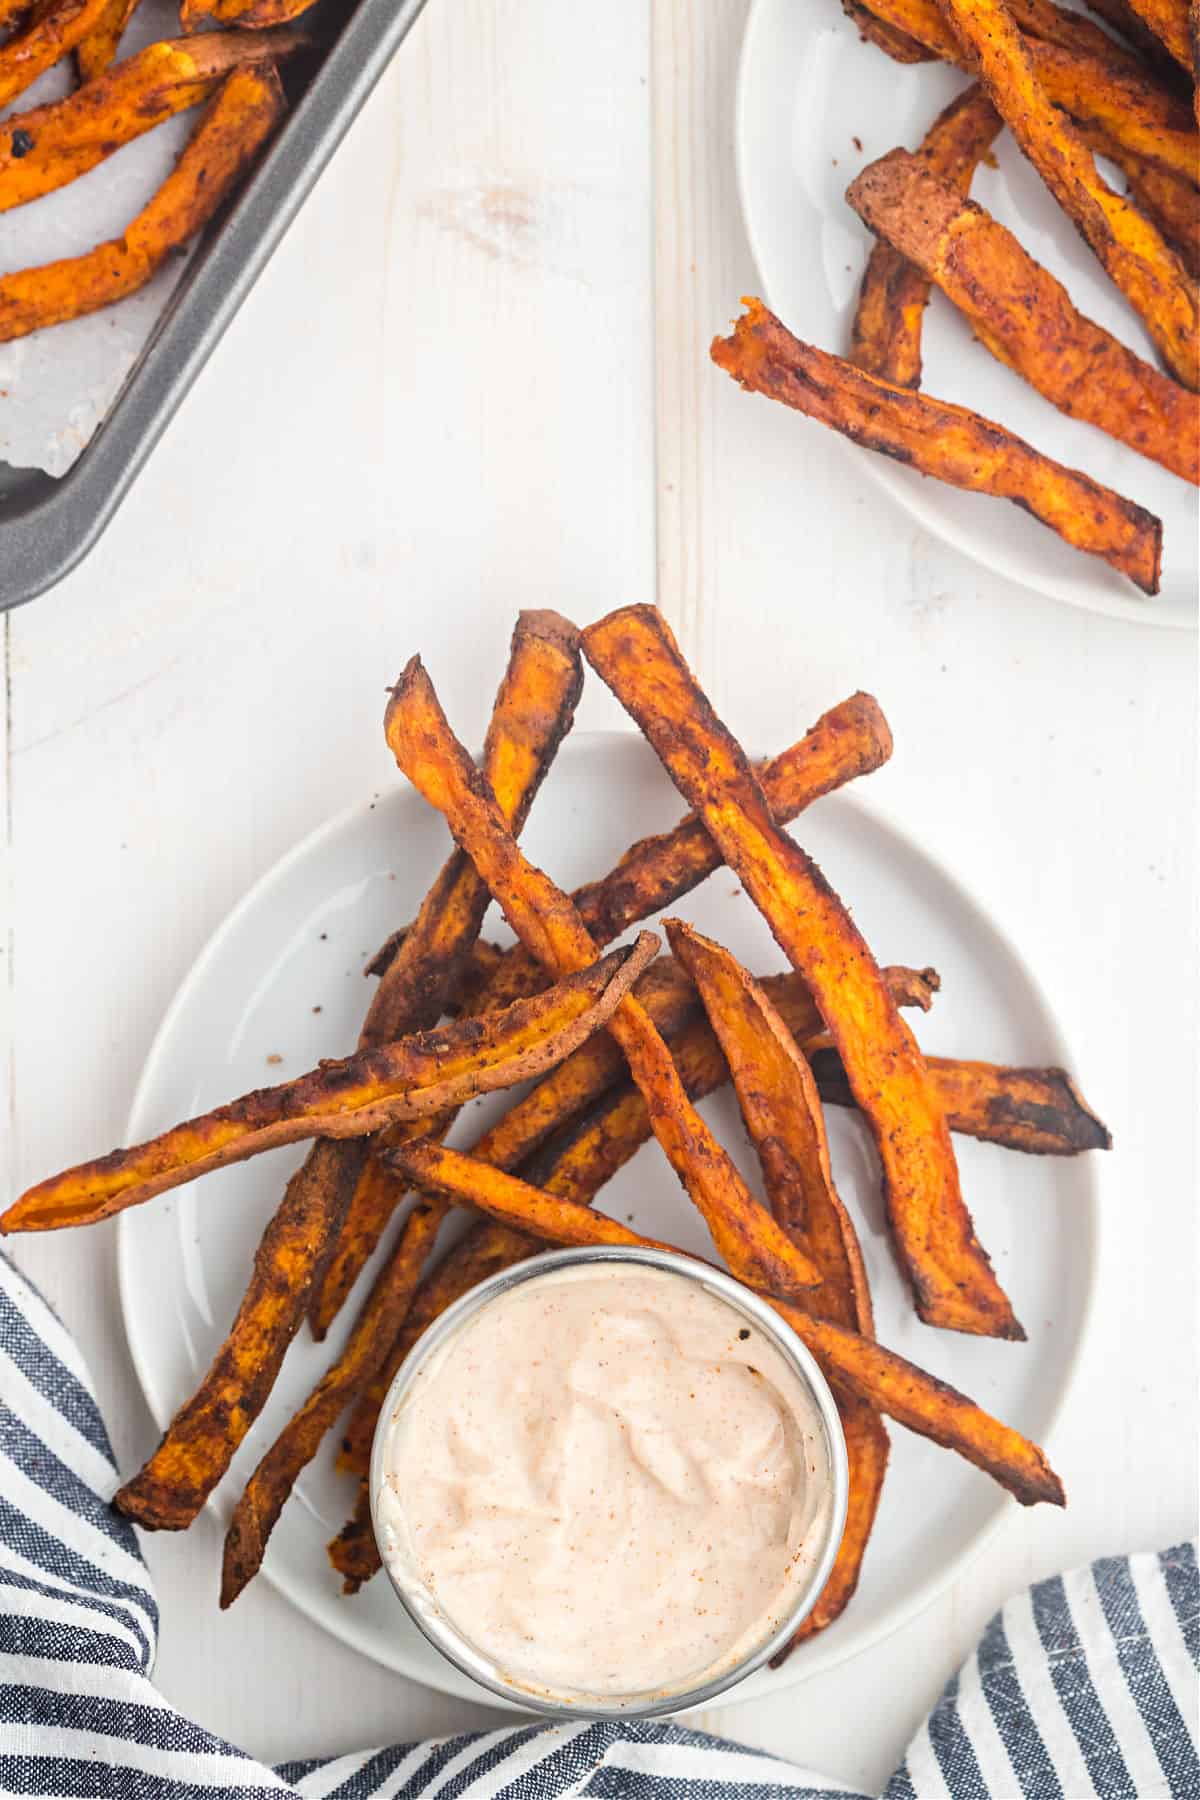 Sweet potato fries served on a white plate with a cup of cinnamon dipping sauce.